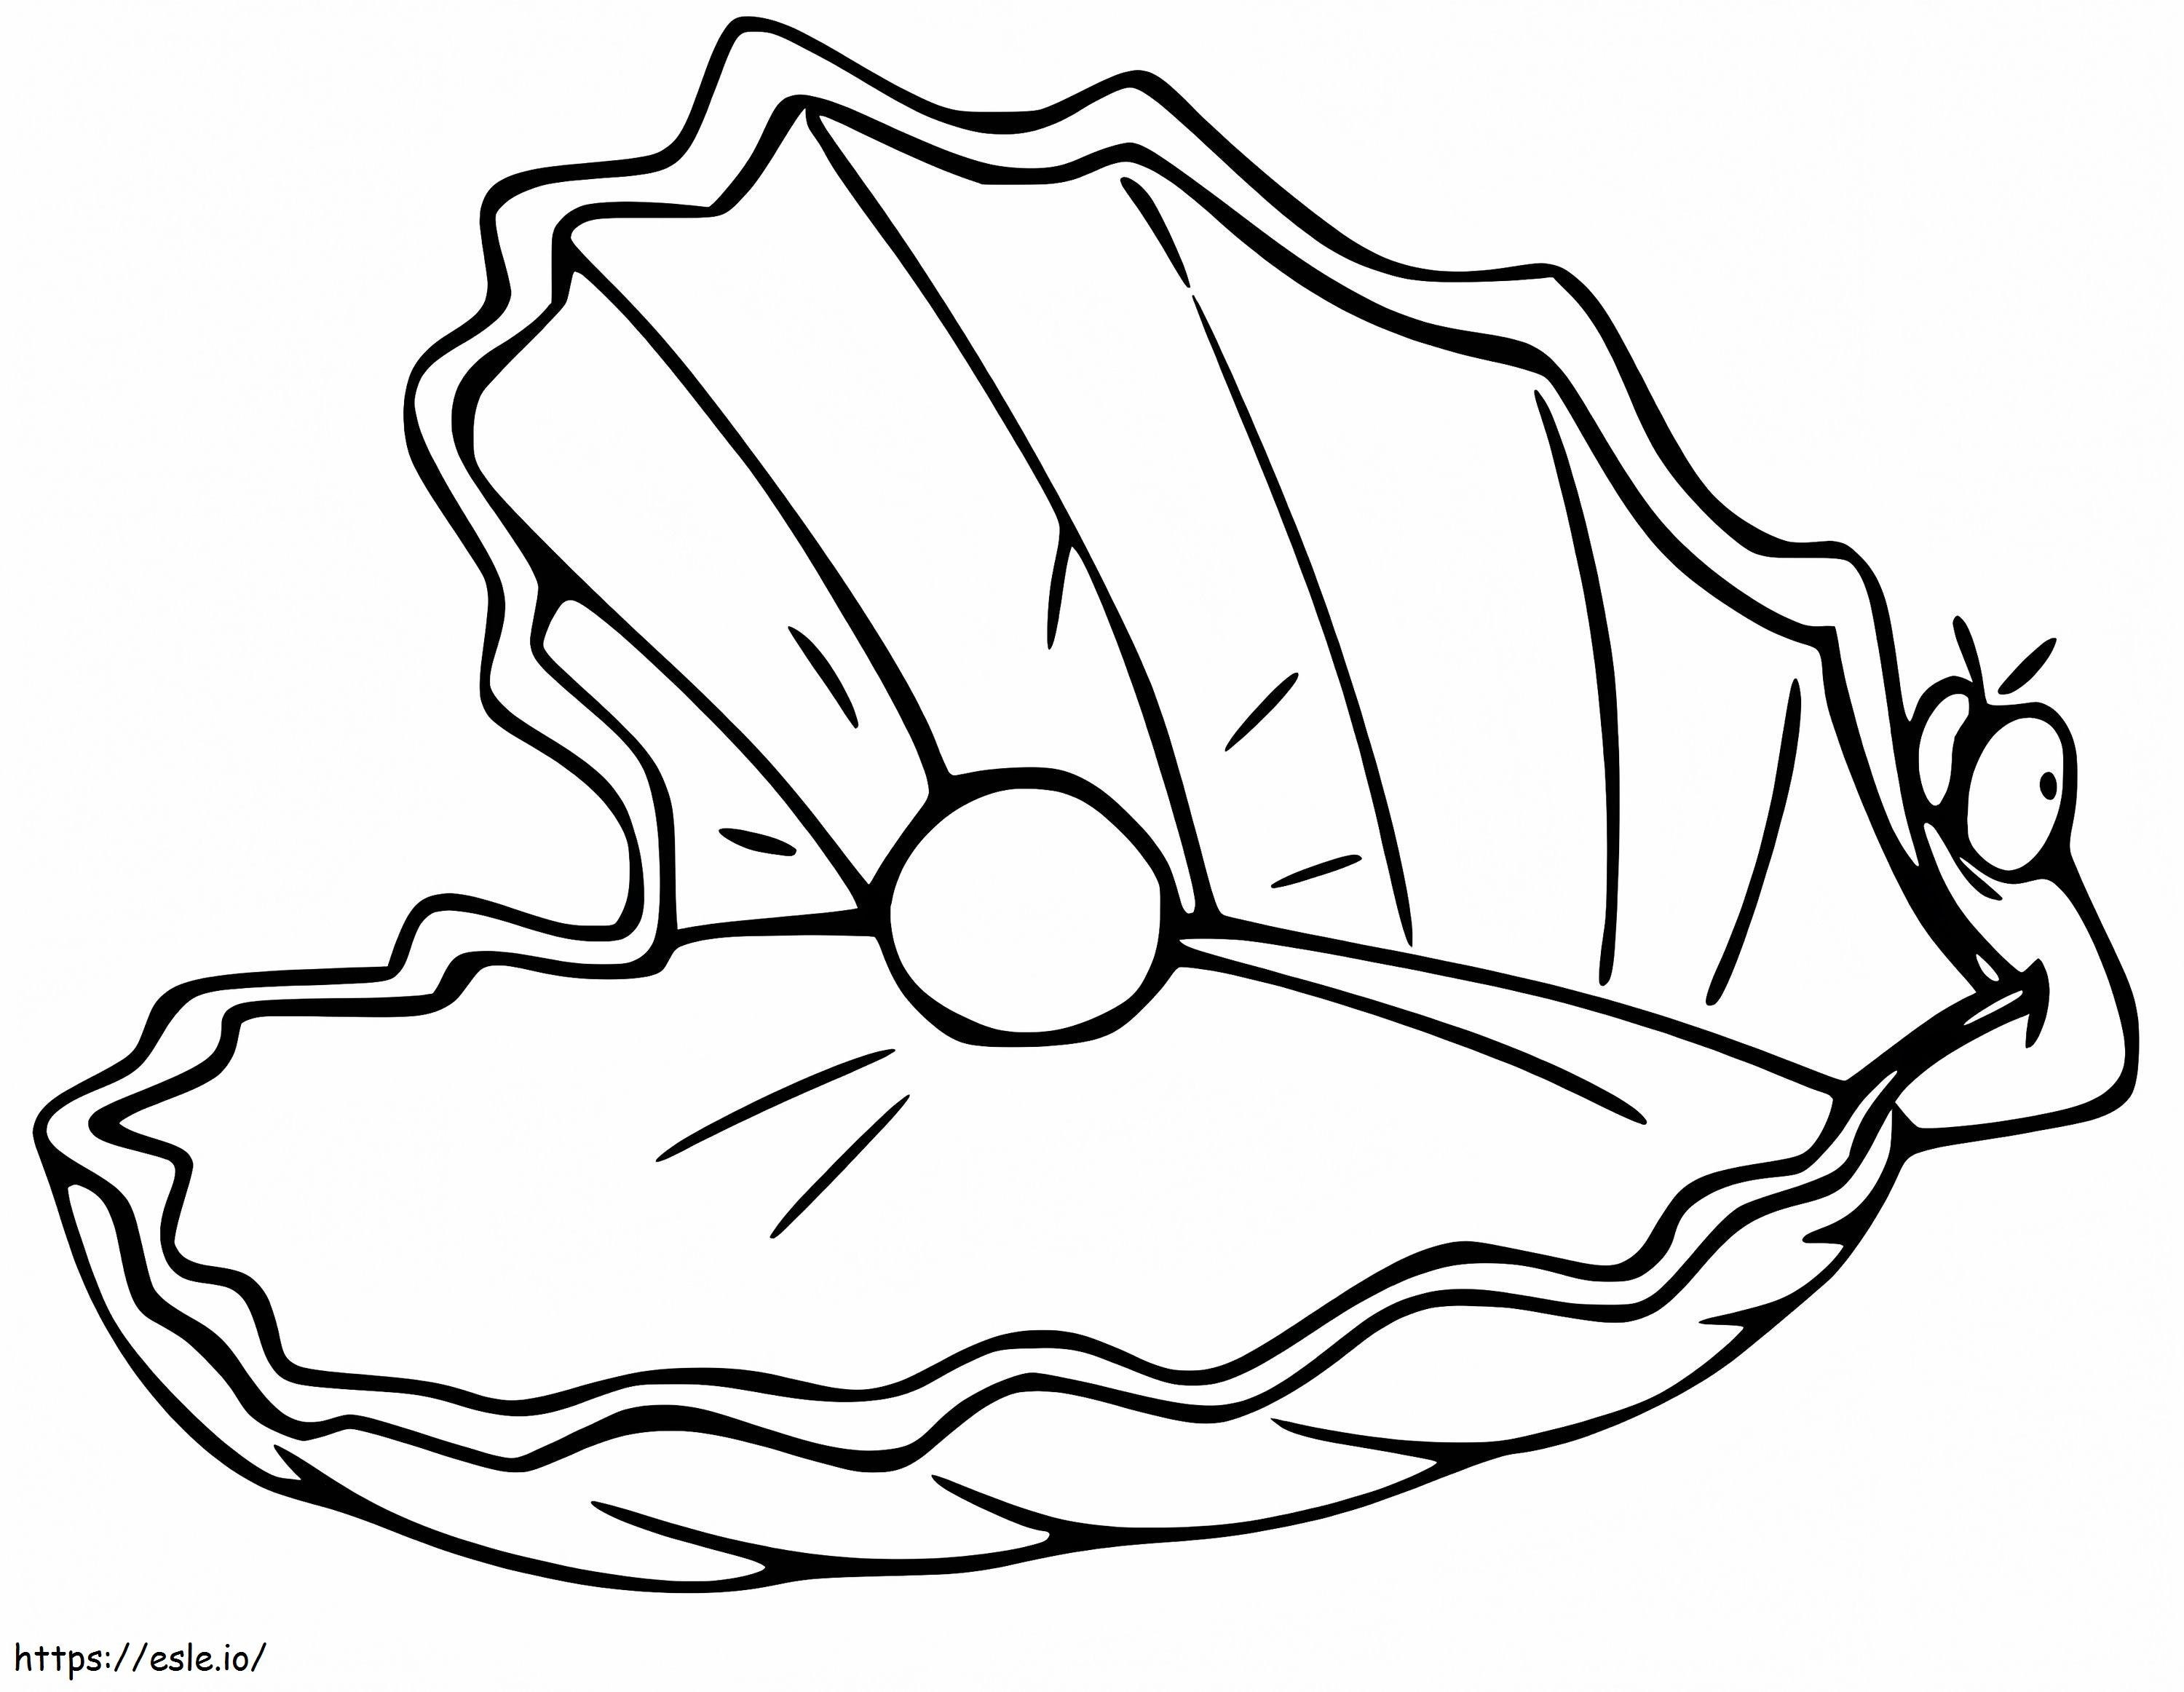 Funny Scallop coloring page